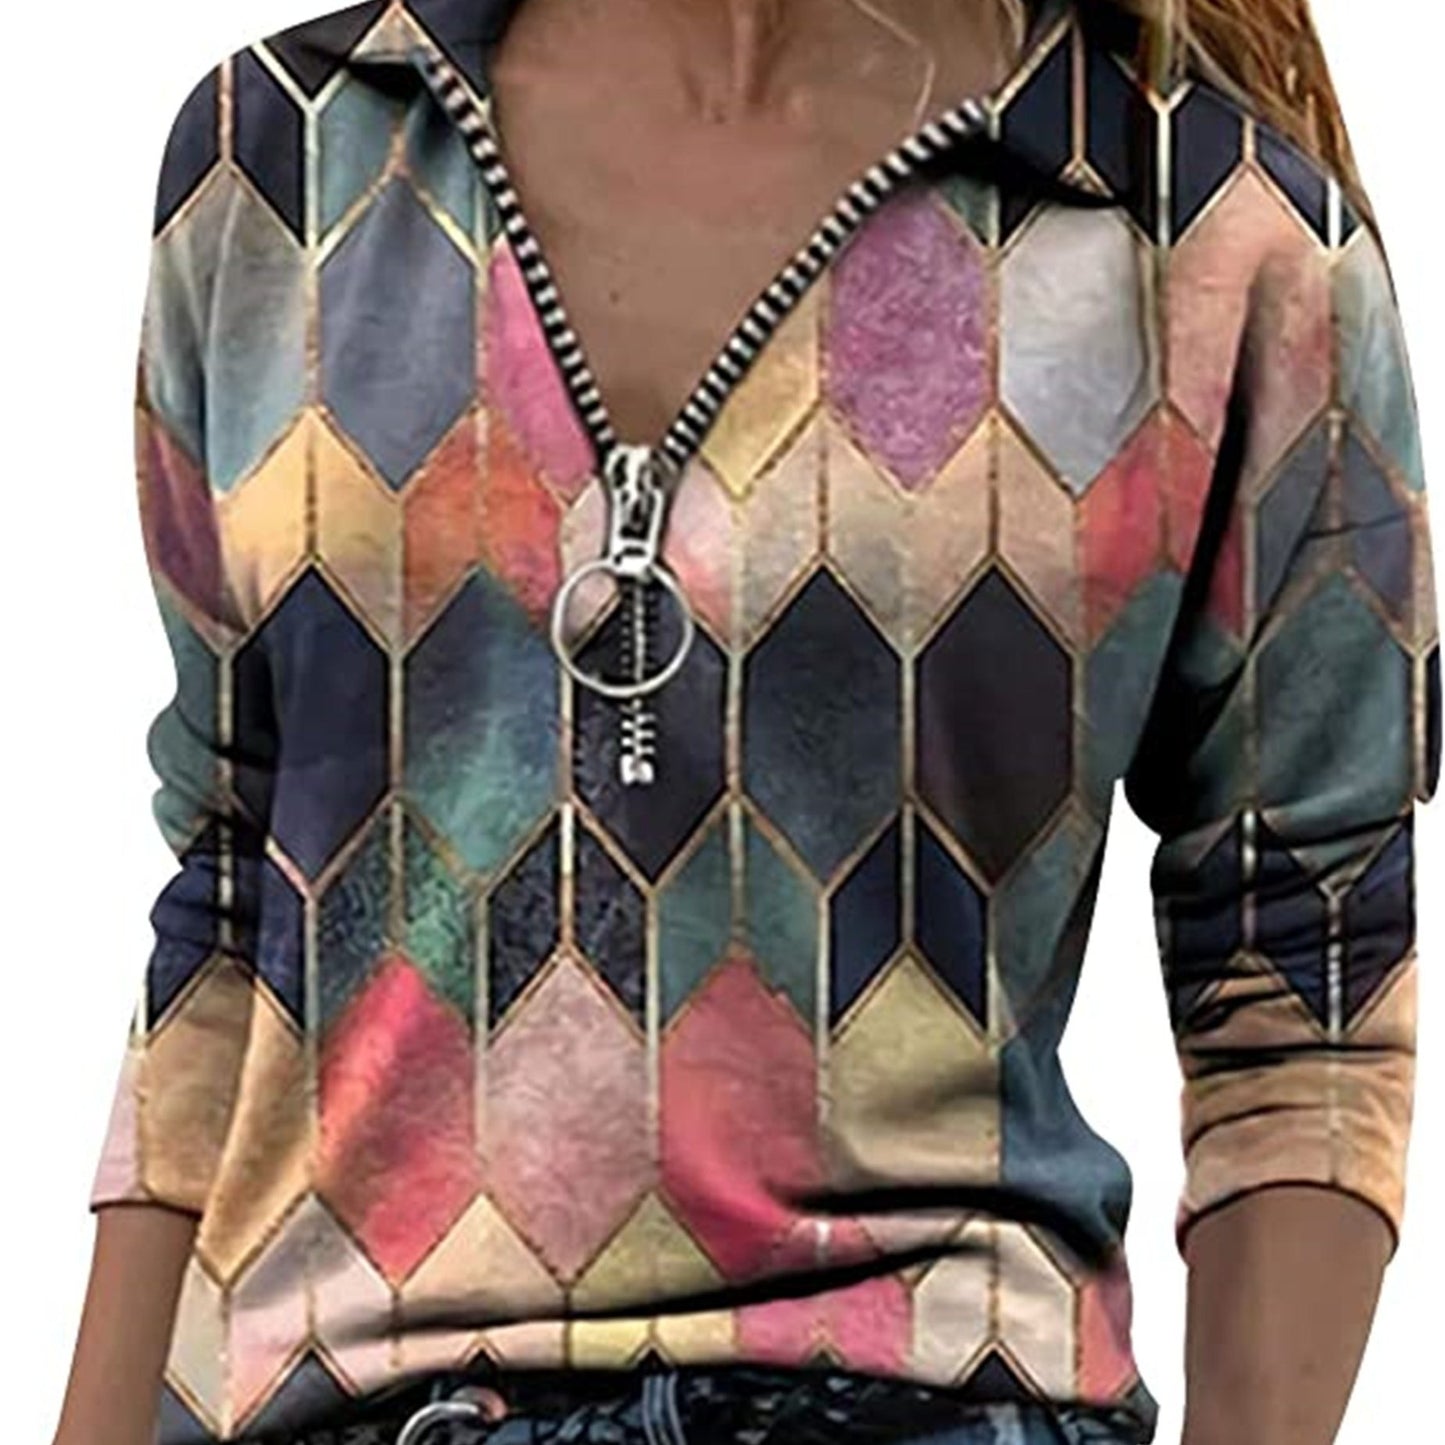 Women's Business Casual Zipper Tops, Elegant & Stylish Tops For Office & Work, Women's Clothing